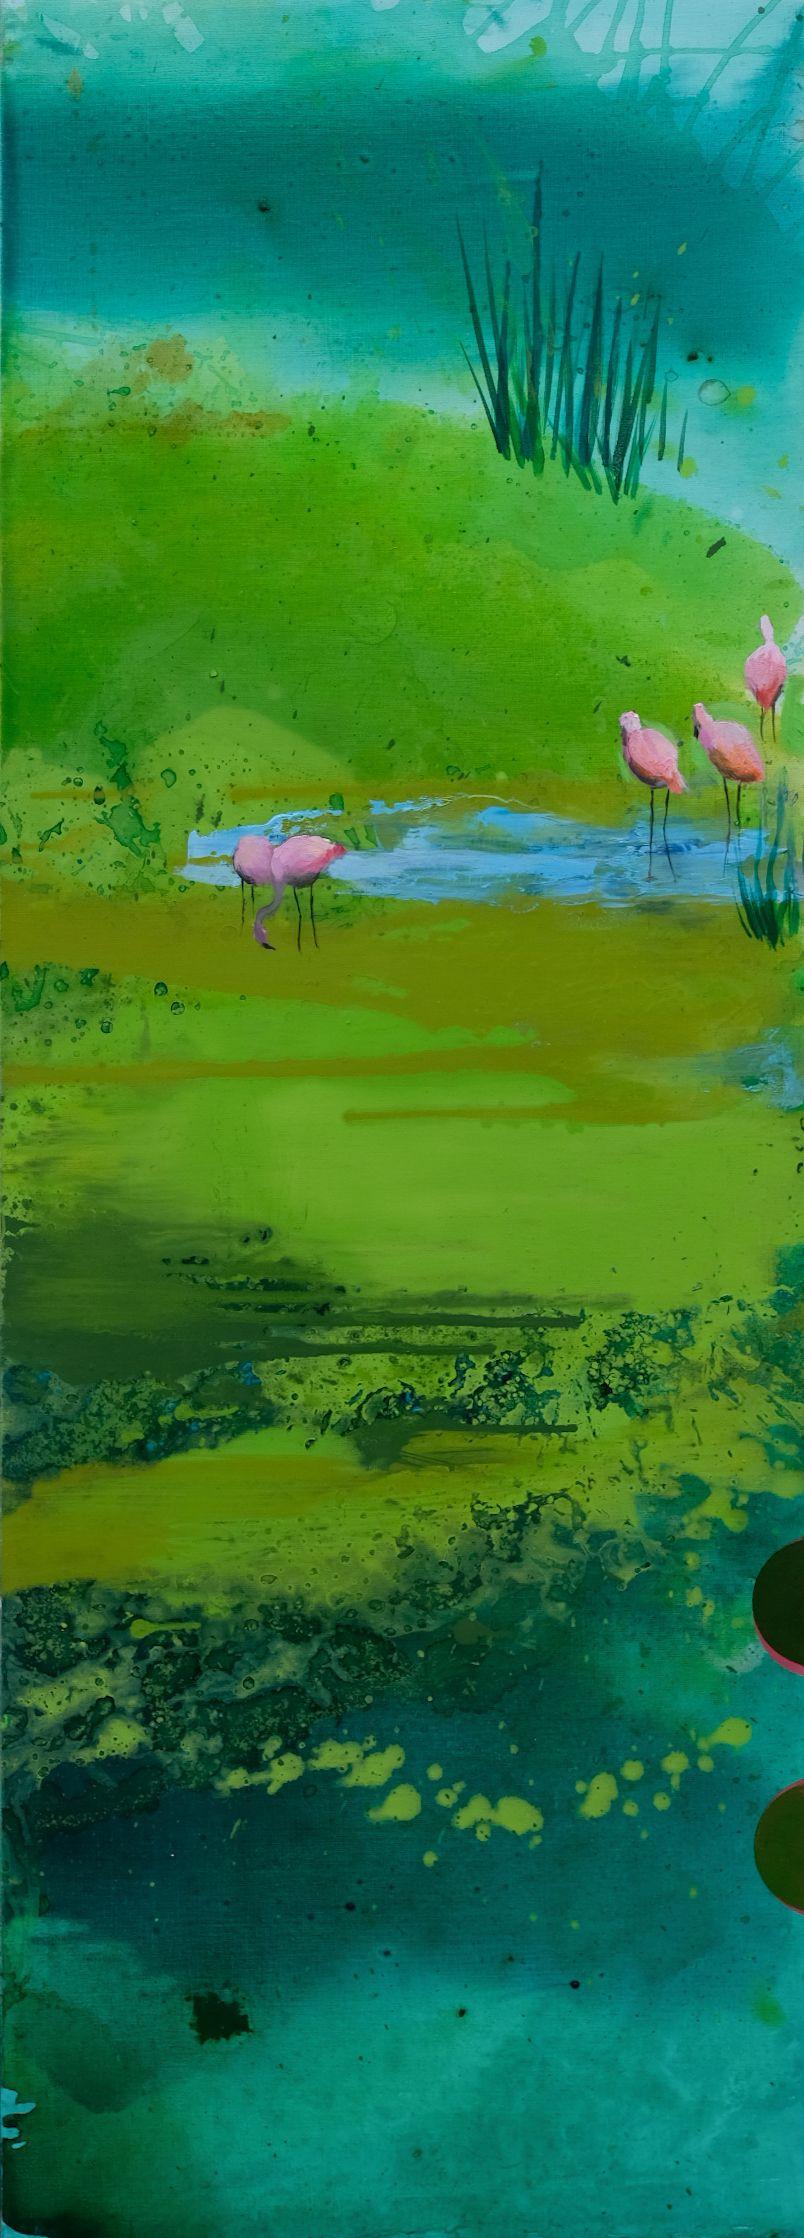 Pink Flamingos - Modern Landscape Oil Painting, Lake View, Nature, Green Tones